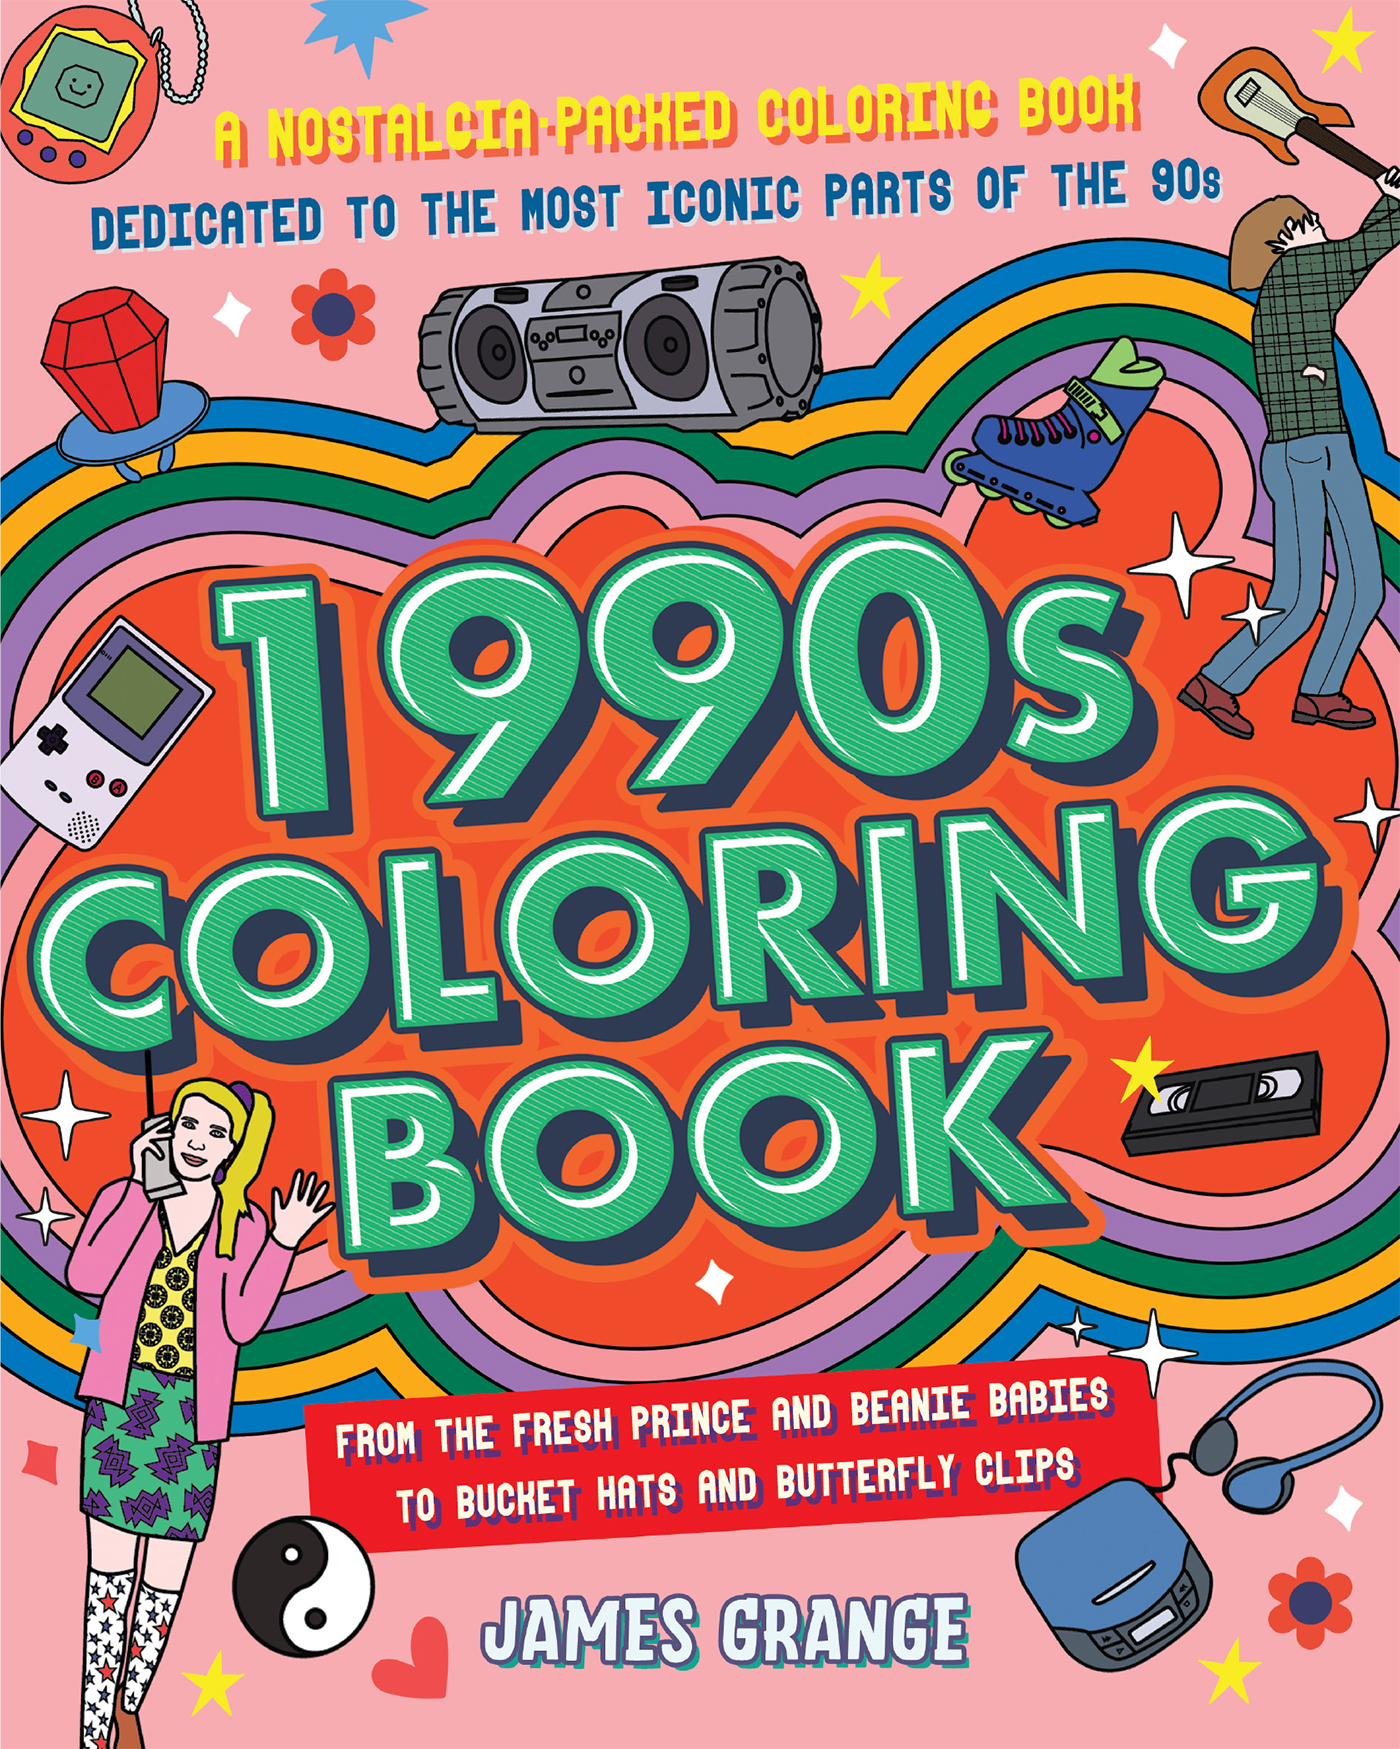 1990s Coloring Book